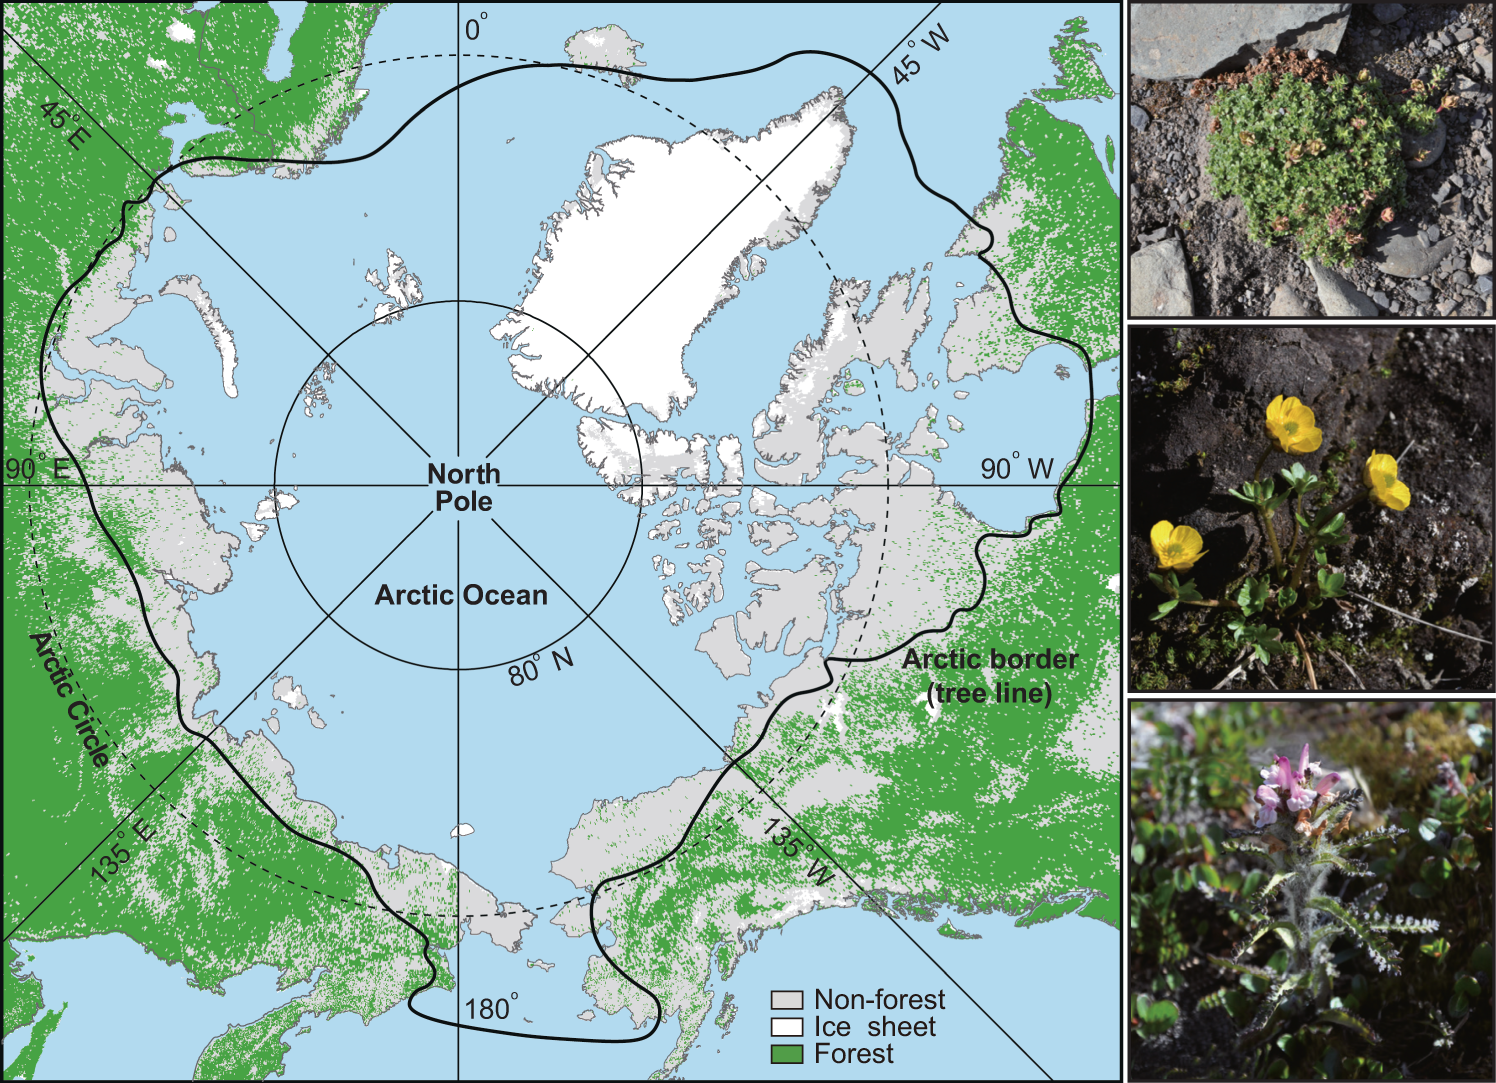 Evolutionary history of the Arctic flora